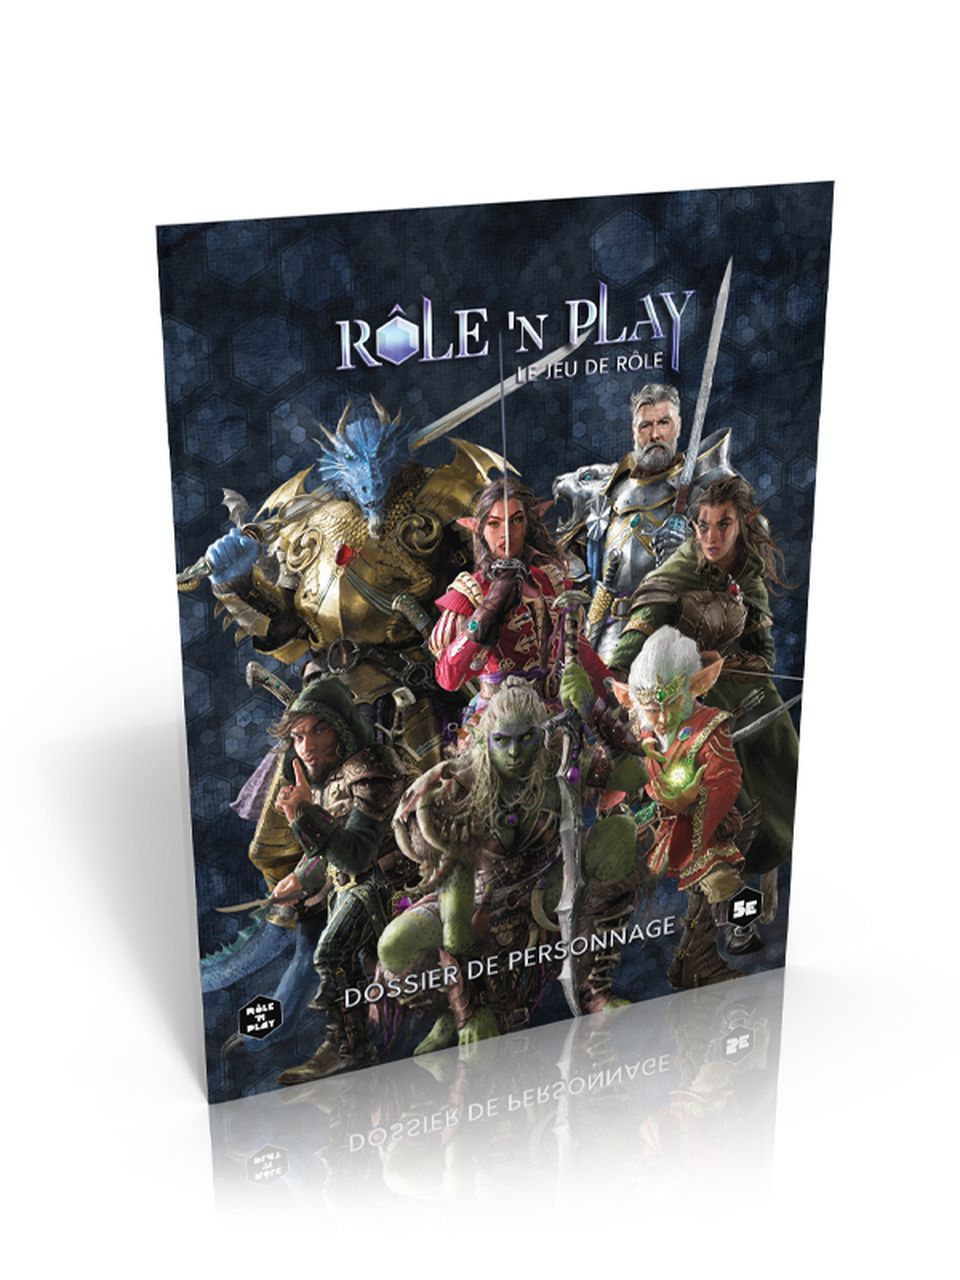 Role'n Play - Dossier de personnage image